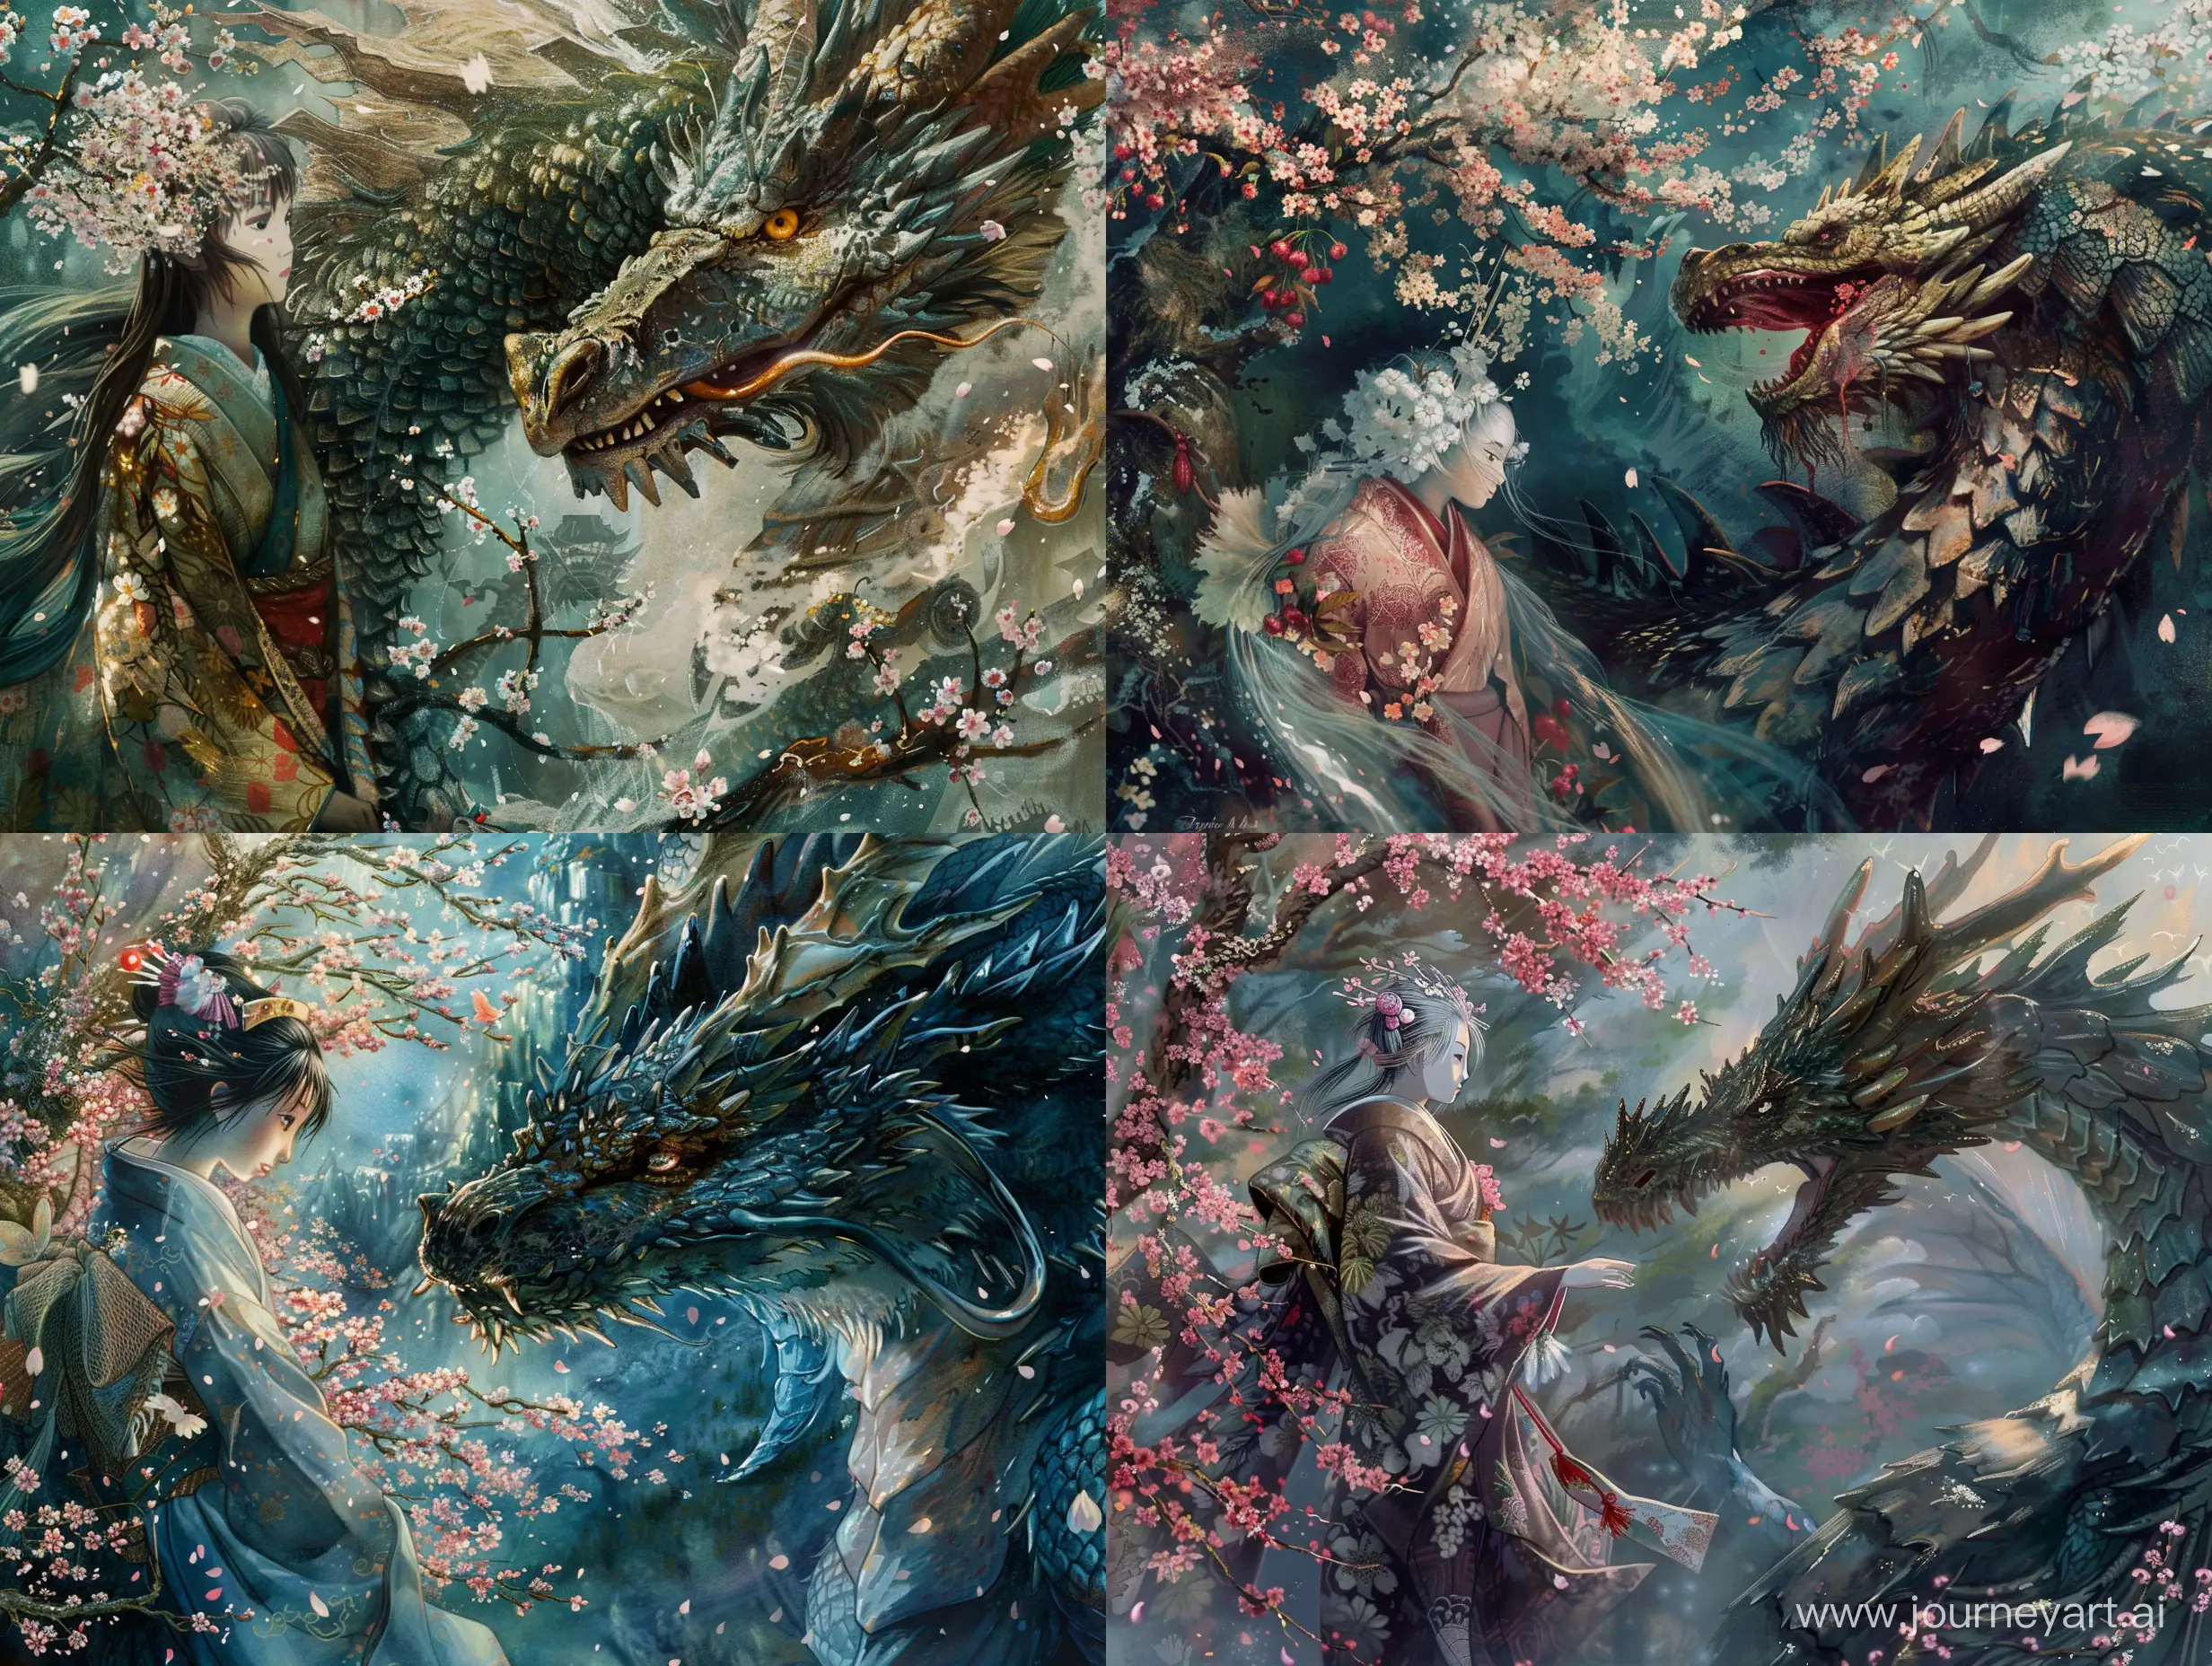 In the lush world of Spirited Away, a mesmerizingly juxtaposed duo emerges: a graceful kami spirit and a fierce dragon, their contrasting beauty and power captured in a majestic painting. The kami spirit embodies ethereal elegance with flowing robes adorned in blooming cherry blossoms, while the mighty dragon exudes strength in every sinewy scale and piercing gaze. This stunning image skillfully intertwines nature's allure with mythical might, inviting viewers to marvel at the harmonious blend of beast and beauty.